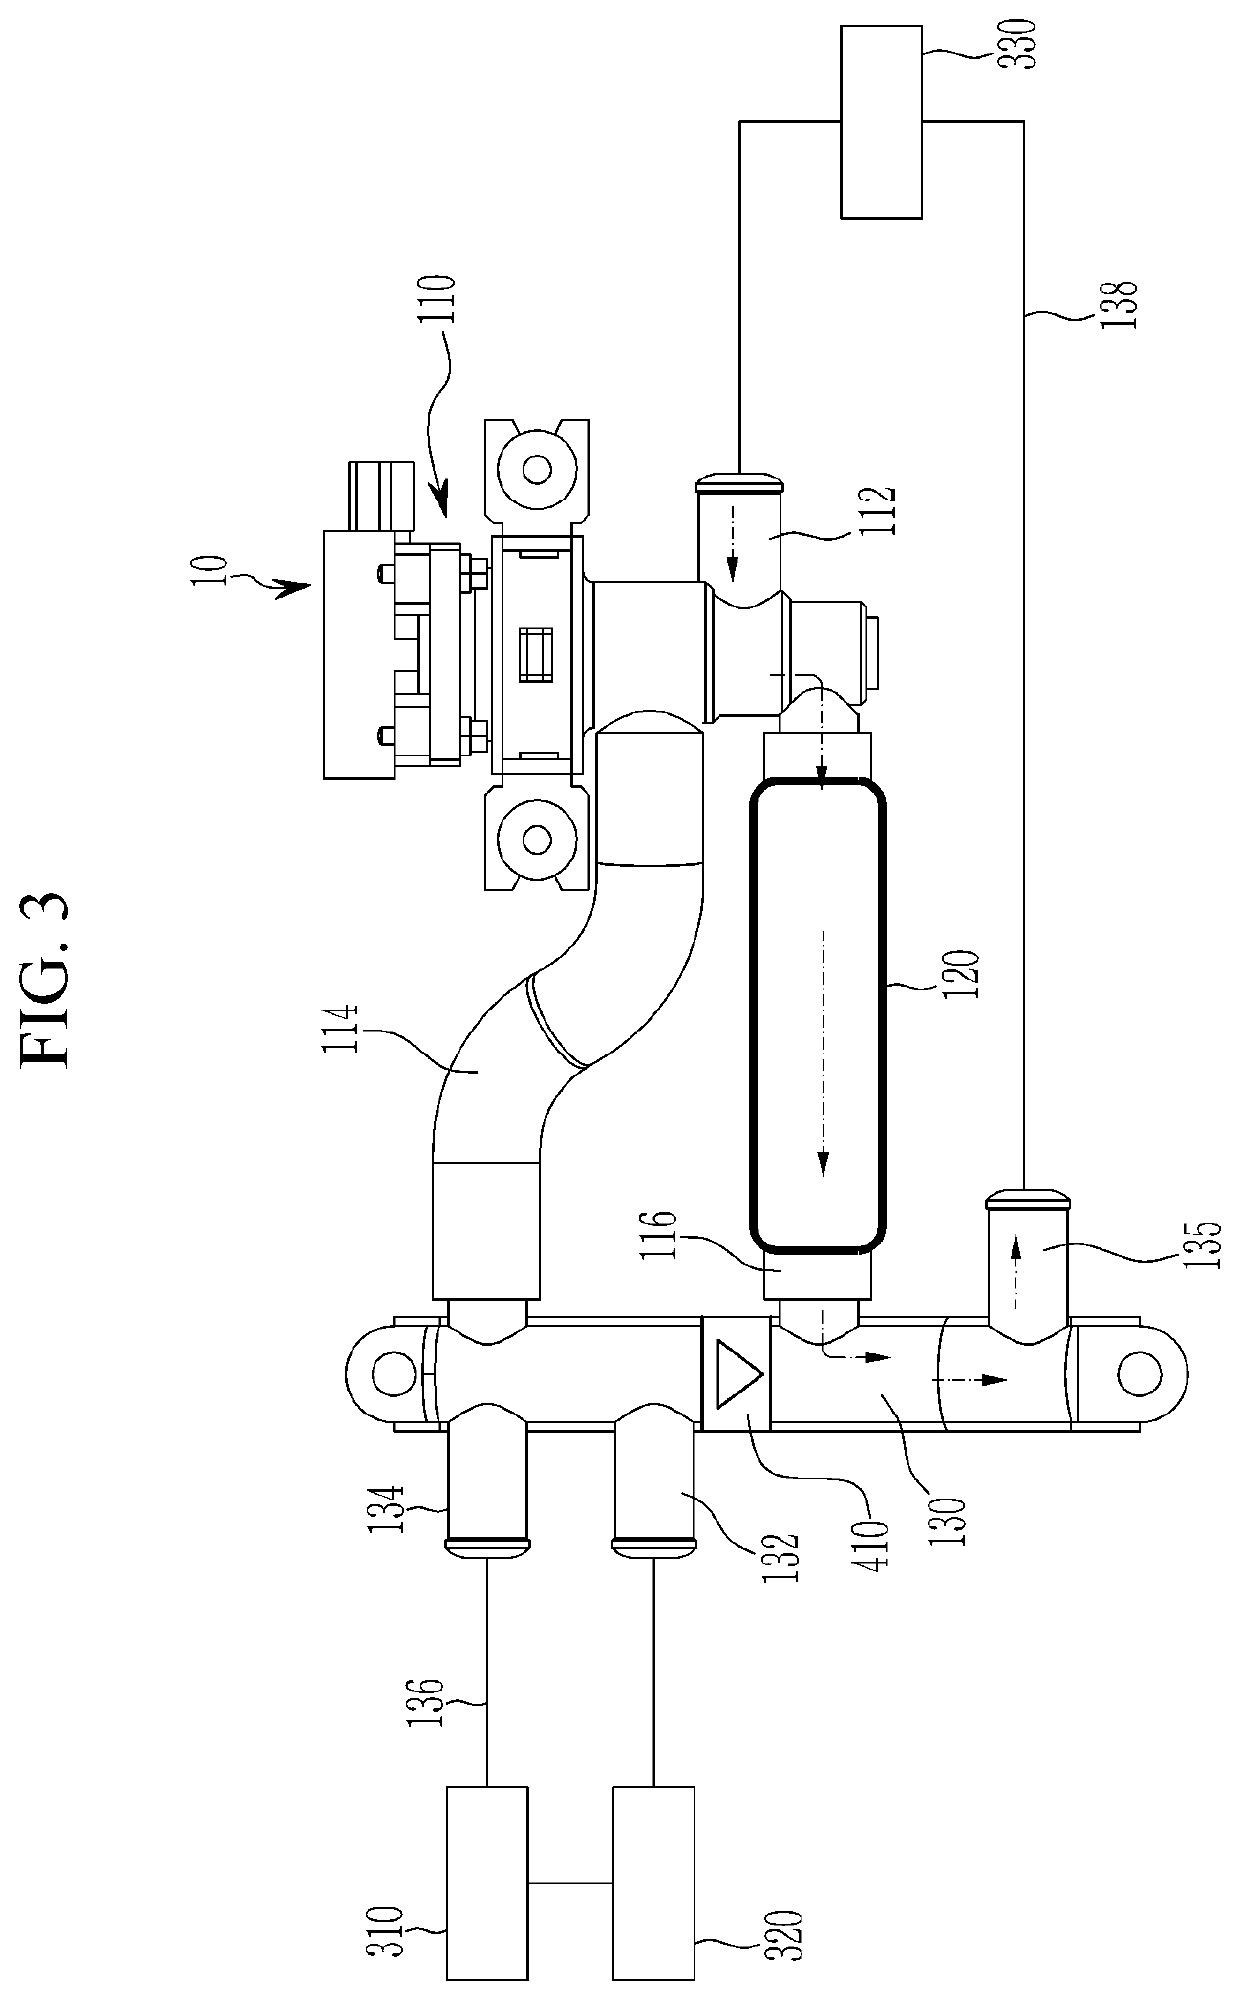 Cooling system for electric vehicle